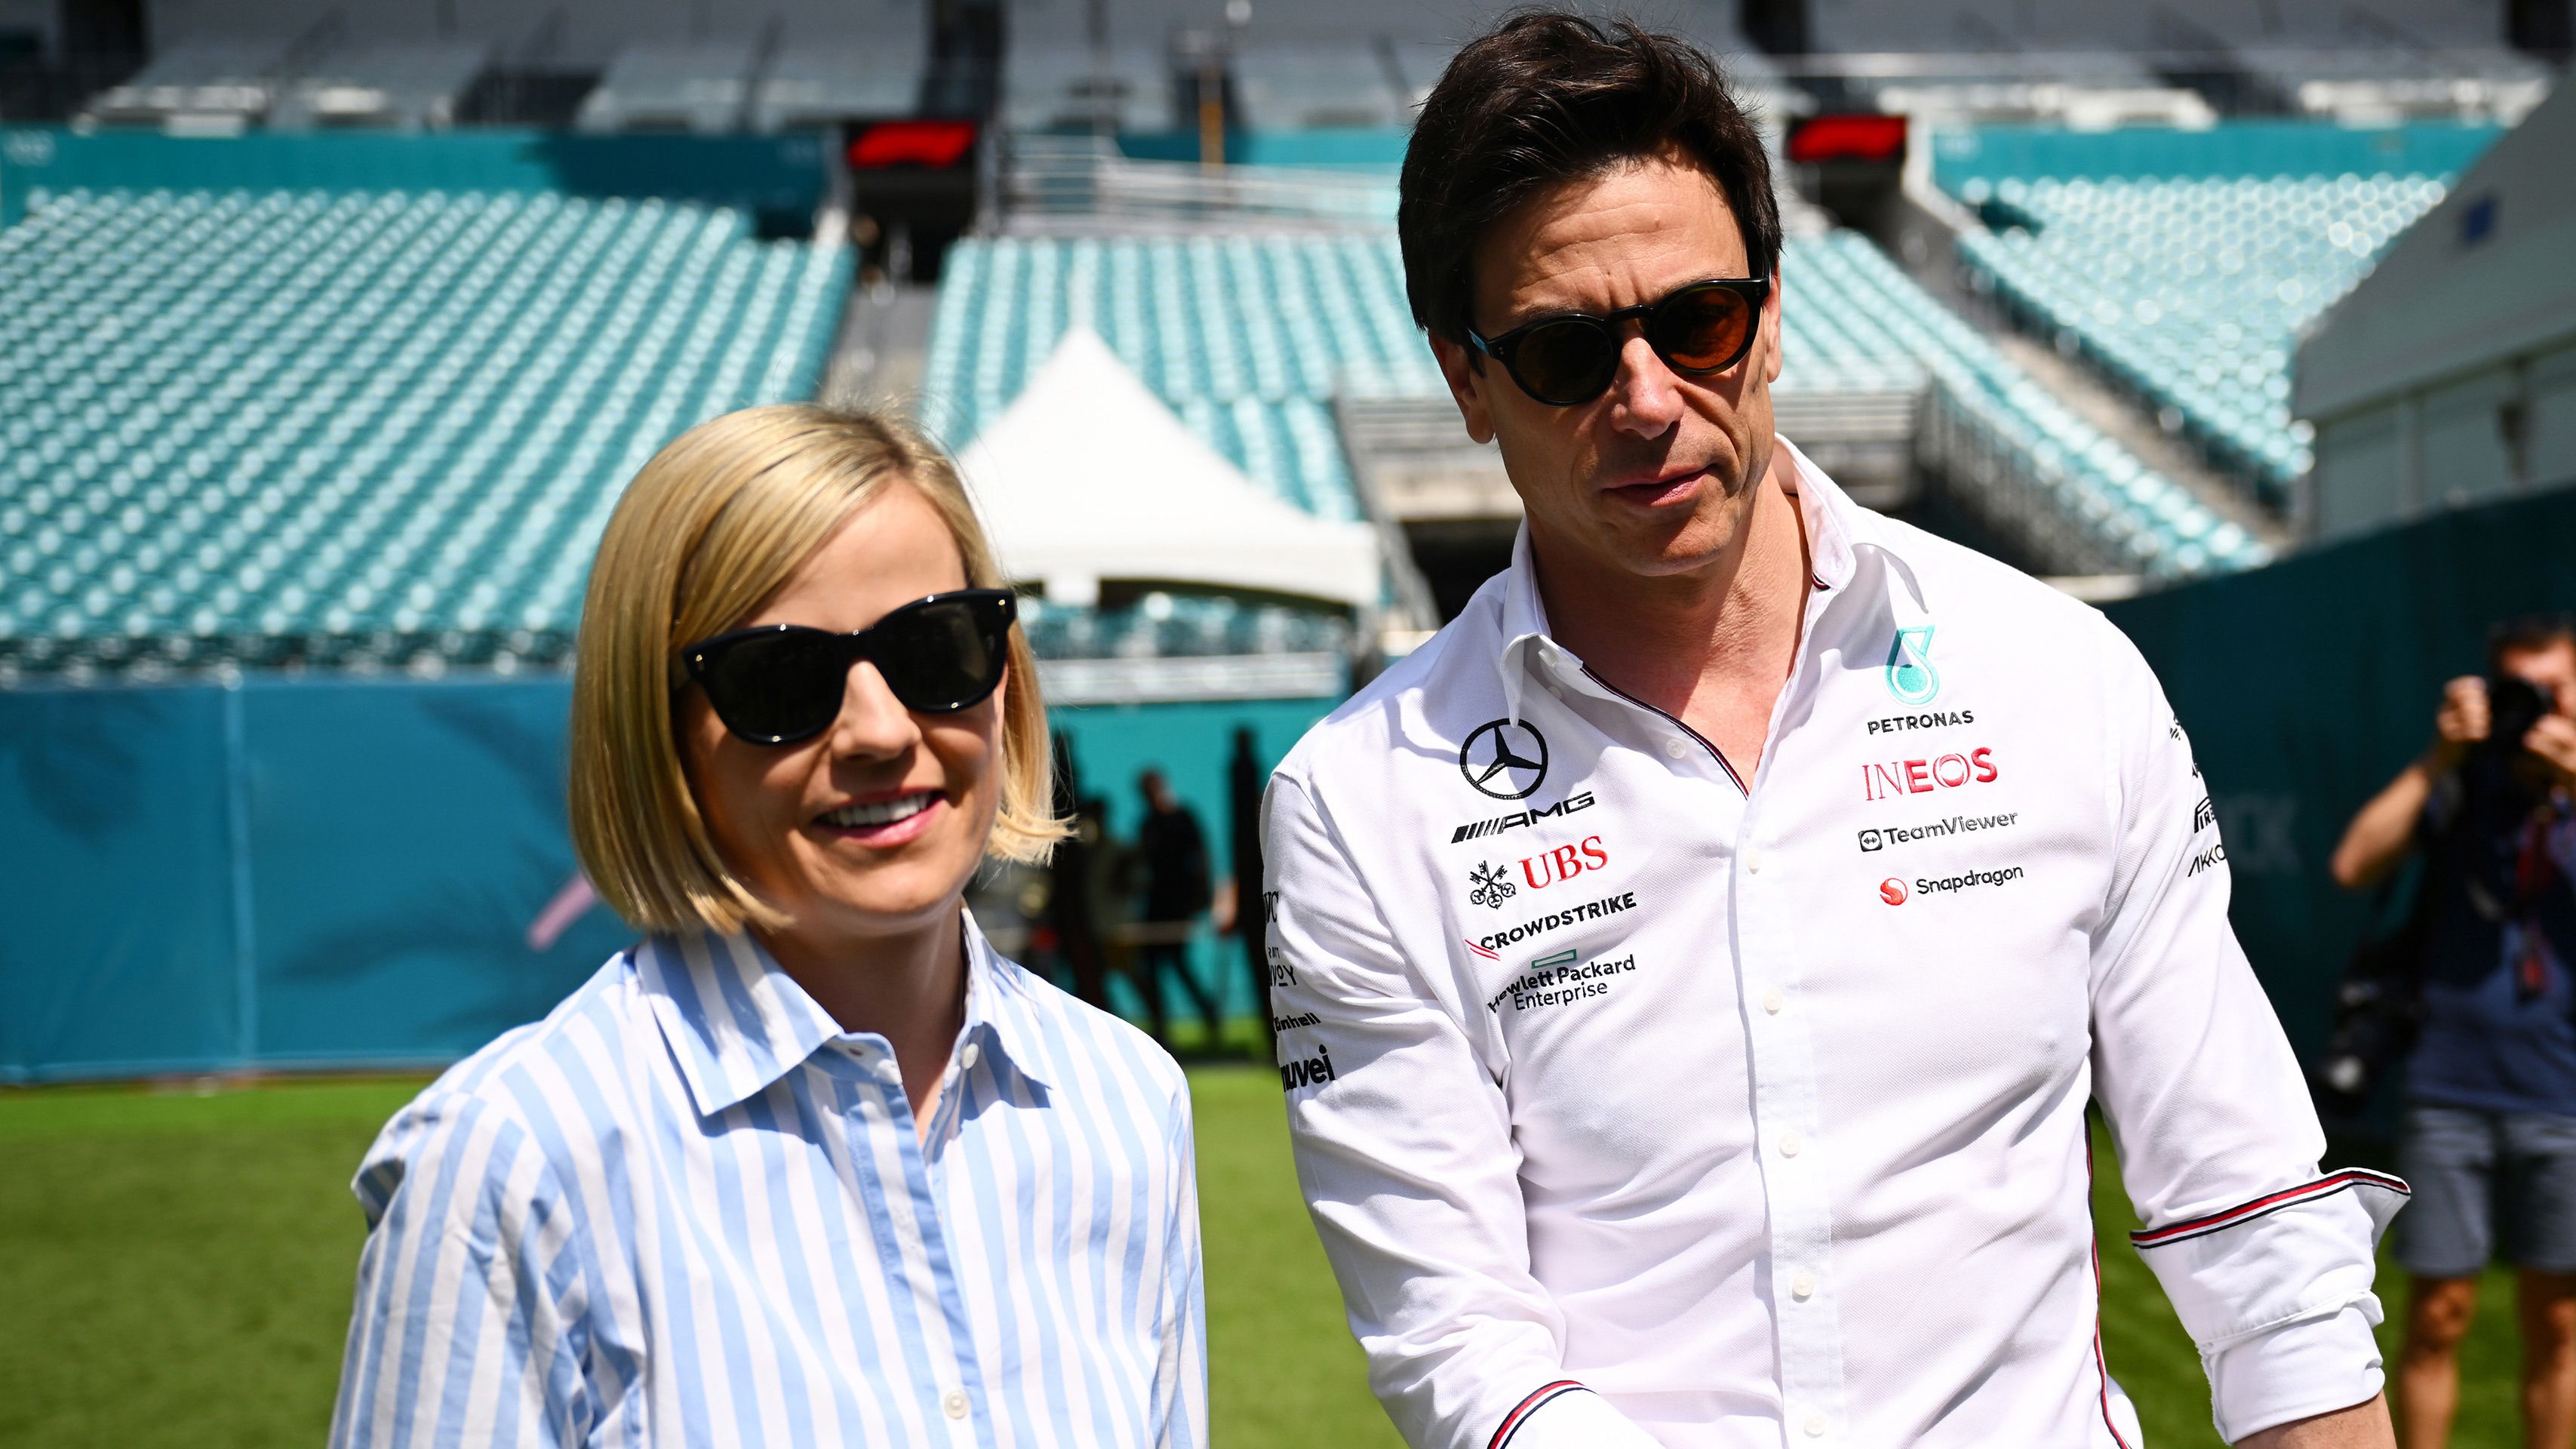 F1 Academy managing director Susie Wolff (left) and her husband Mercedes team principal Toto Wolff.